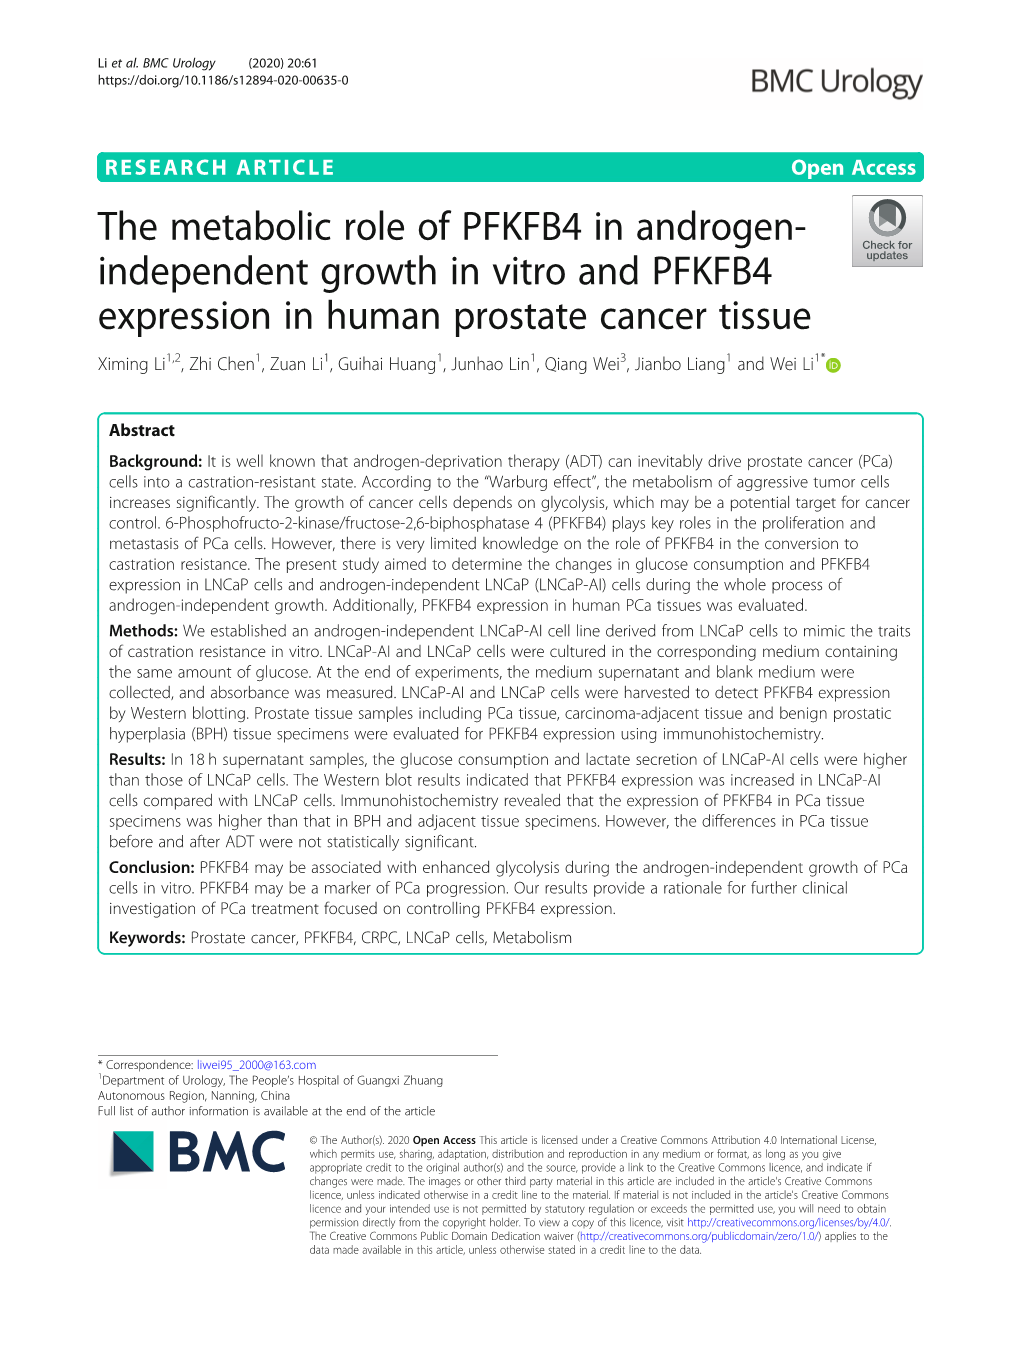 The Metabolic Role of PFKFB4 in Androgen-Independent Growth In